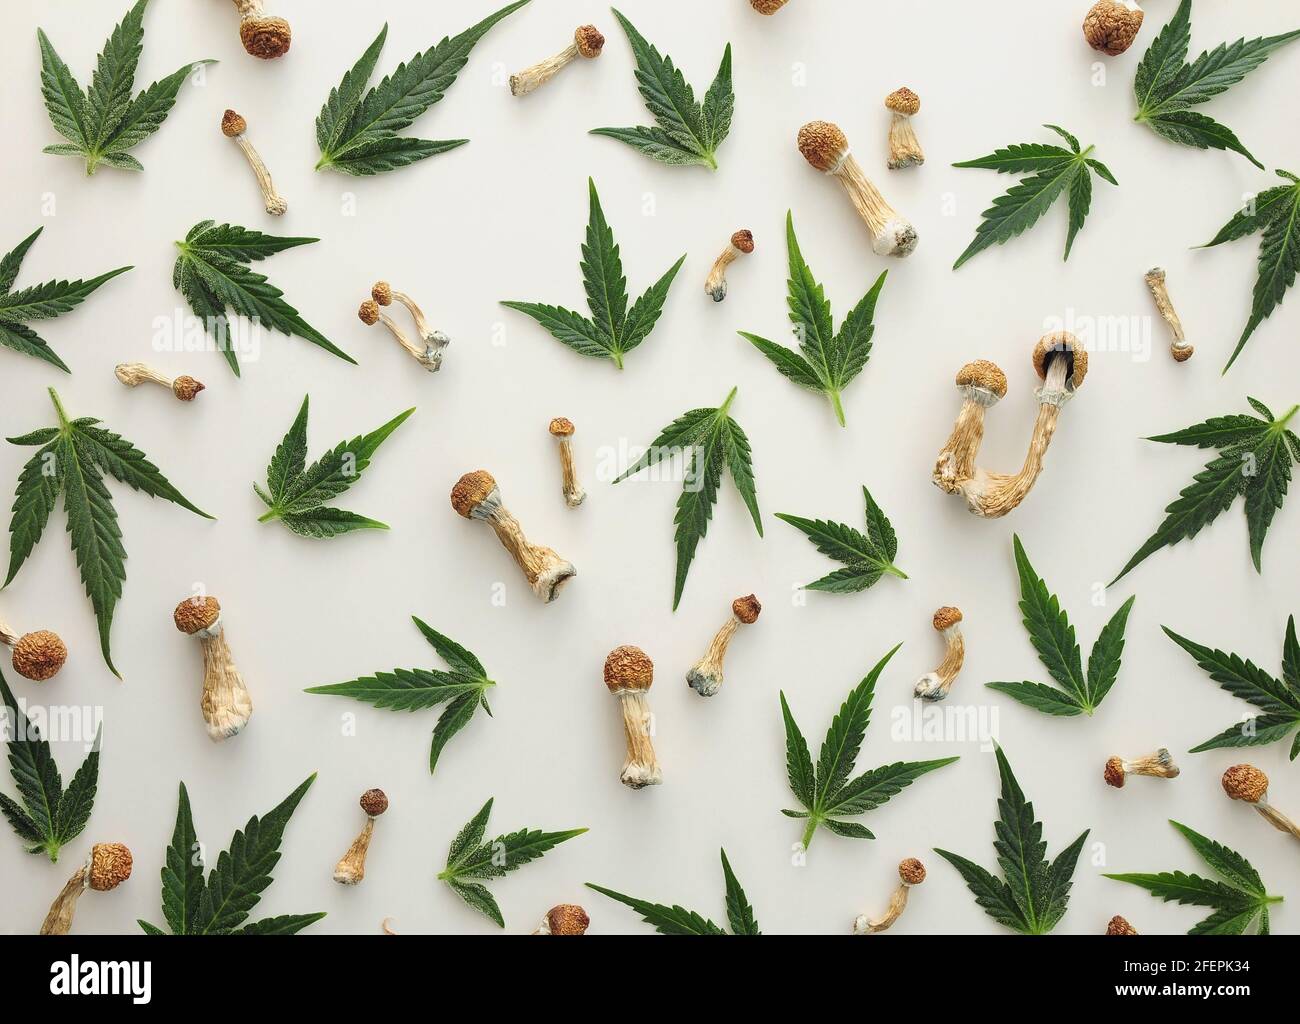 Microdosing concept. Pattern of psilocybin mushrooms and marijuana leaves isolated on white background. Psychedelic pattern, magic trip concept. Stock Photo